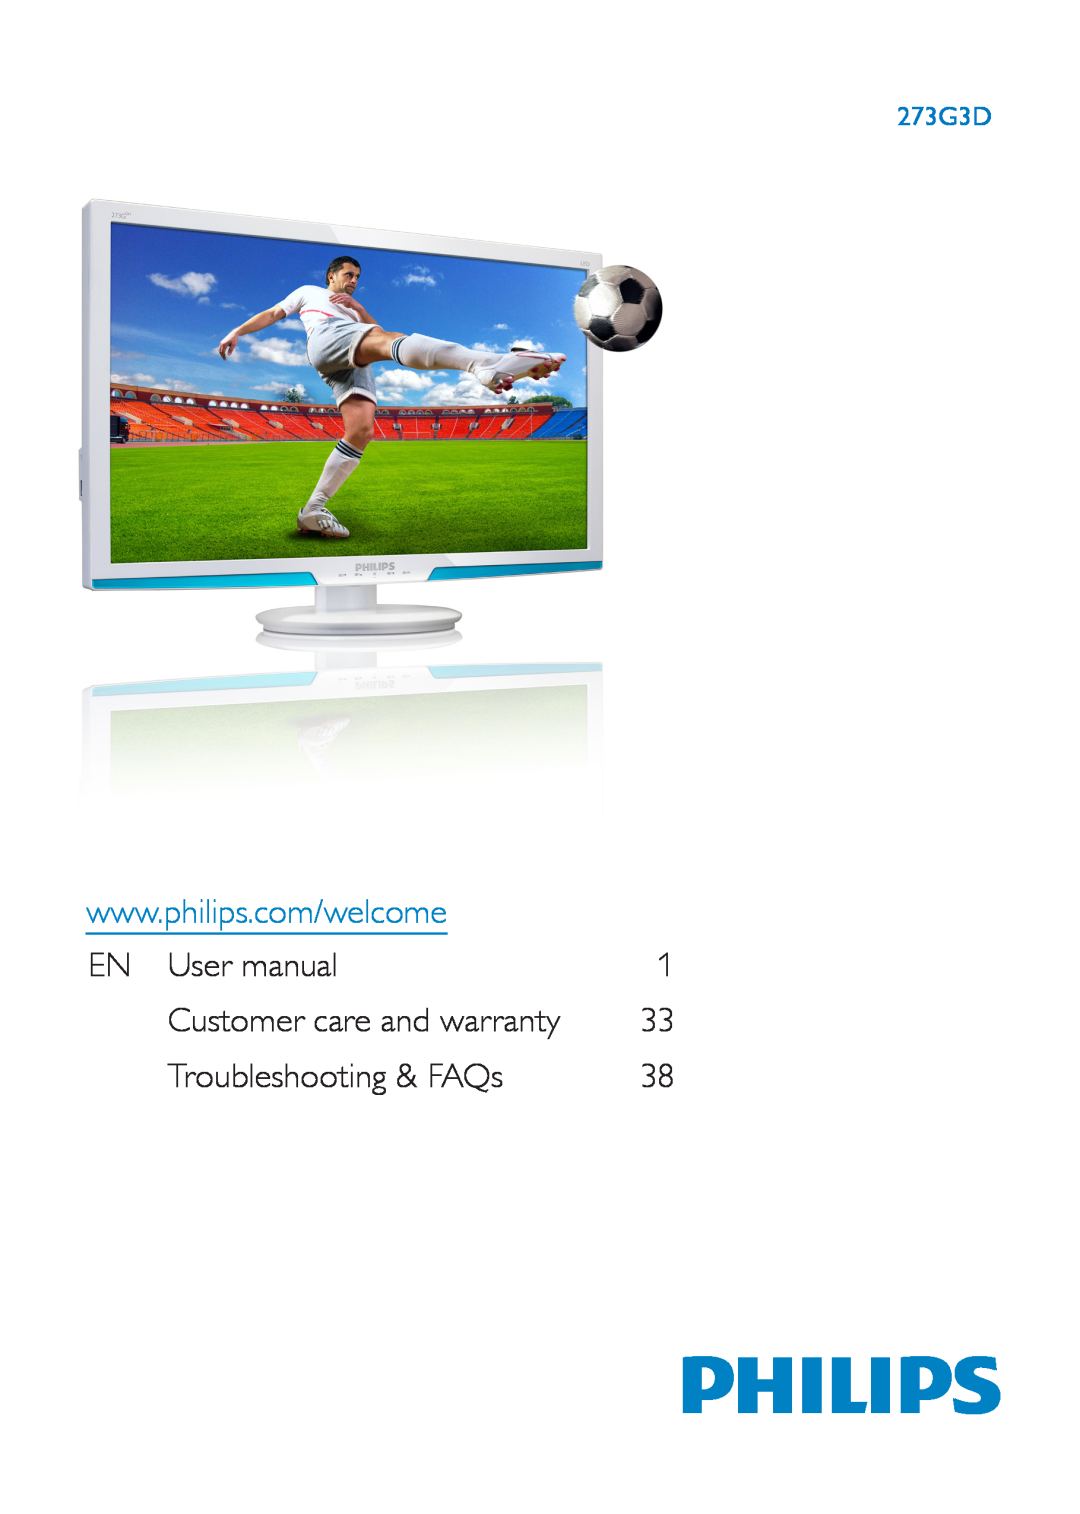 Philips 273G3D user manual EN User manual, Troubleshooting & FAQs, Customer care and warranty 